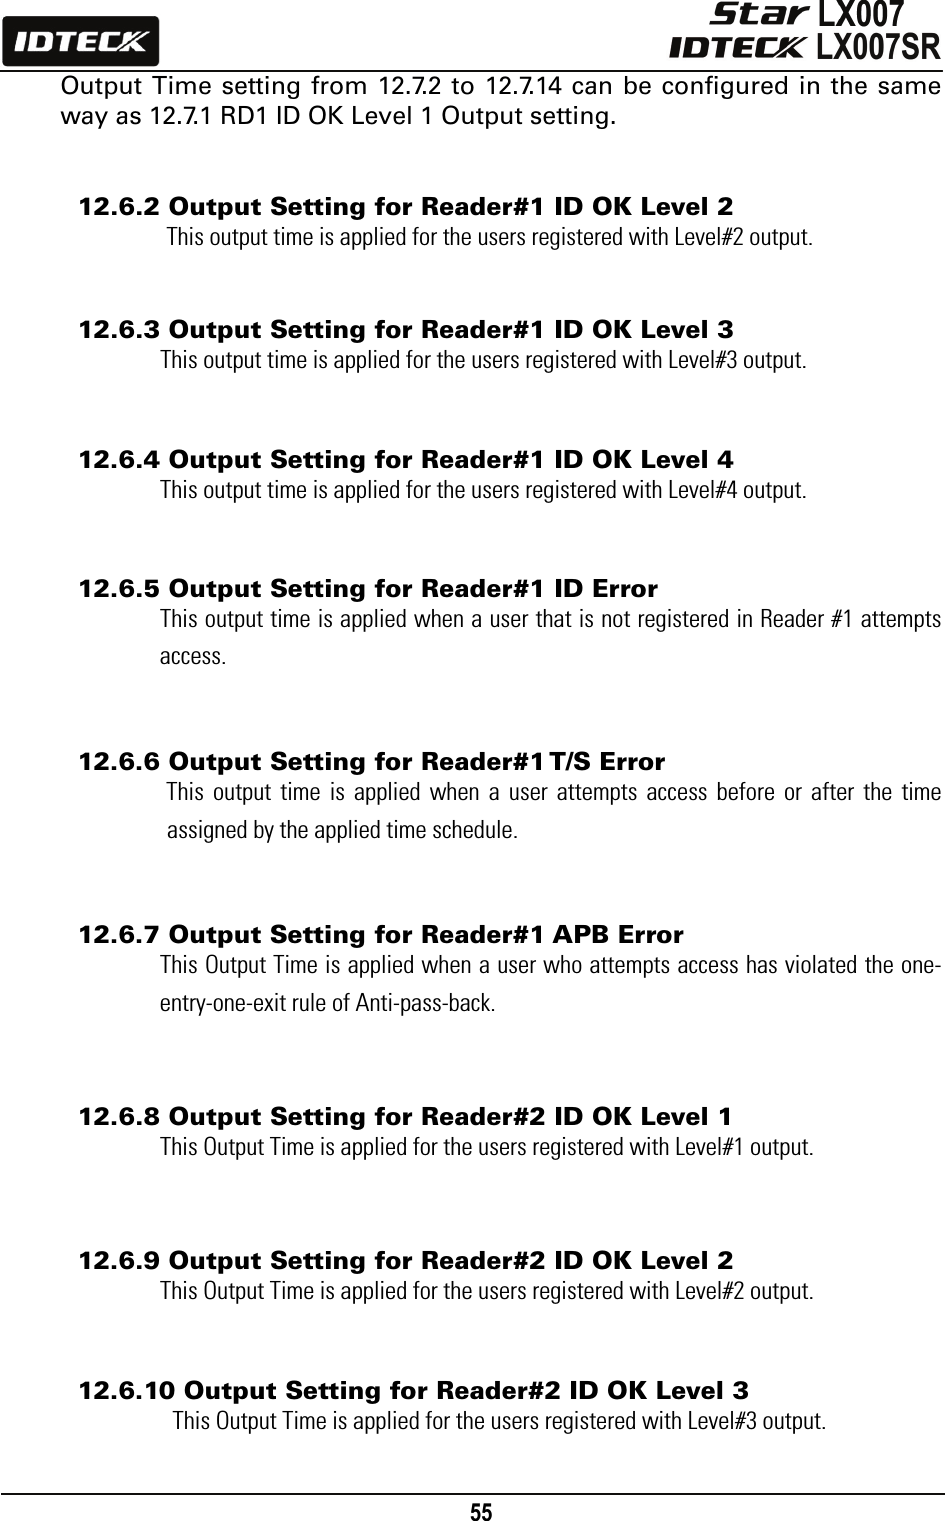                                                                                    55      Output Time setting from 12.7.2 to 12.7.14 can be configured in the same way as 12.7.1 RD1 ID OK Level 1 Output setting.   12.6.2 Output Setting for Reader#1 ID OK Level 2 This output time is applied for the users registered with Level#2 output.   12.6.3 Output Setting for Reader#1 ID OK Level 3 This output time is applied for the users registered with Level#3 output.   12.6.4 Output Setting for Reader#1 ID OK Level 4 This output time is applied for the users registered with Level#4 output.   12.6.5 Output Setting for Reader#1 ID Error This output time is applied when a user that is not registered in Reader #1 attempts access.   12.6.6 Output Setting for Reader#1 T/S Error This output time is applied when a user attempts access before or after the time assigned by the applied time schedule.   12.6.7 Output Setting for Reader#1 APB Error This Output Time is applied when a user who attempts access has violated the one-entry-one-exit rule of Anti-pass-back.   12.6.8 Output Setting for Reader#2 ID OK Level 1 This Output Time is applied for the users registered with Level#1 output.   12.6.9 Output Setting for Reader#2 ID OK Level 2 This Output Time is applied for the users registered with Level#2 output.   12.6.10 Output Setting for Reader#2 ID OK Level 3 This Output Time is applied for the users registered with Level#3 output.  